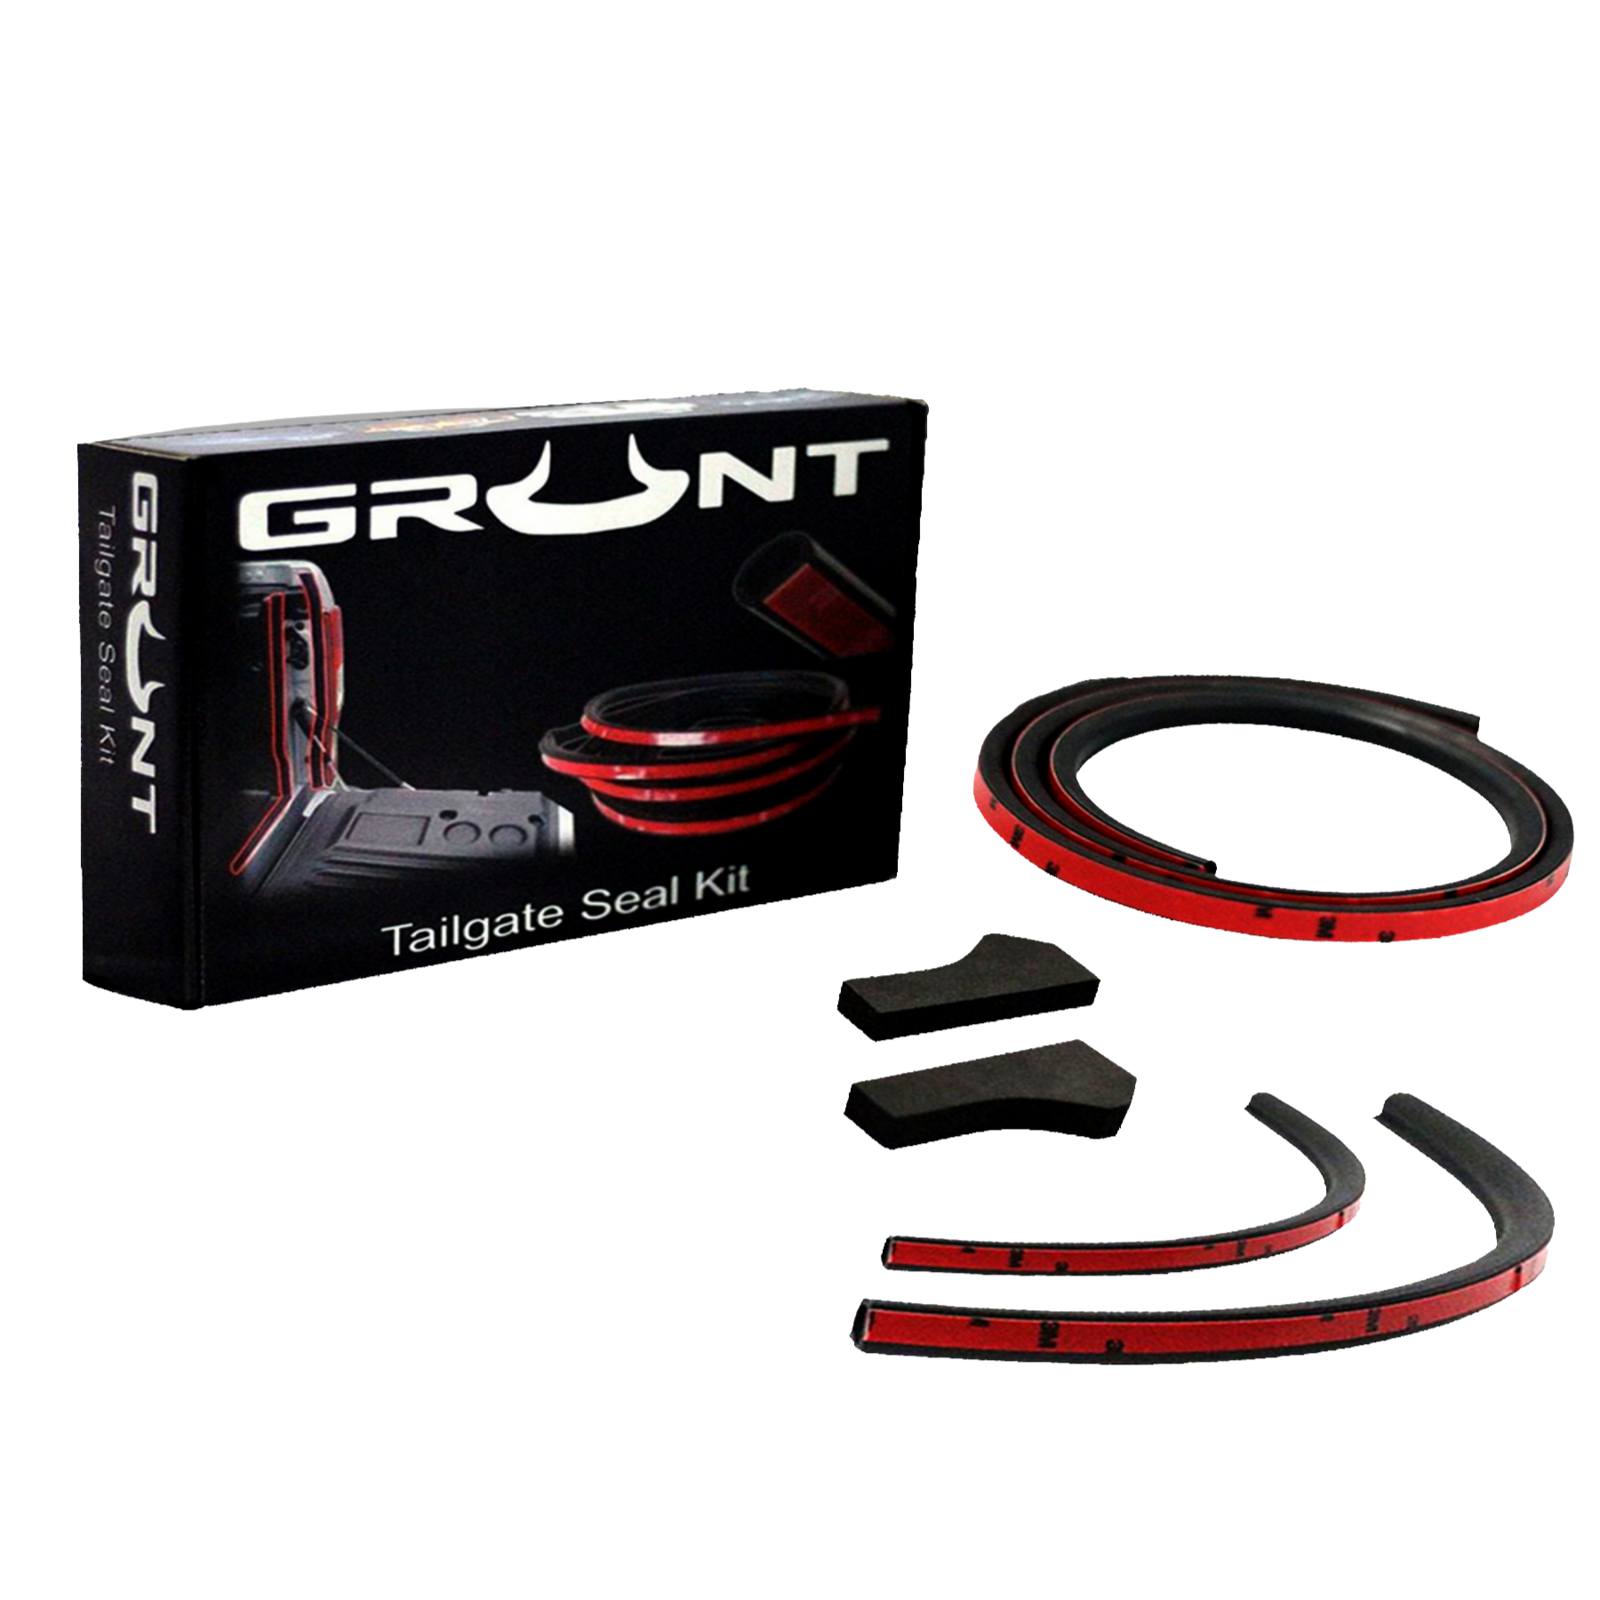 Grunt 4x4 for Nissan Navara NP300 tailgate seal kit fis with or without tub line